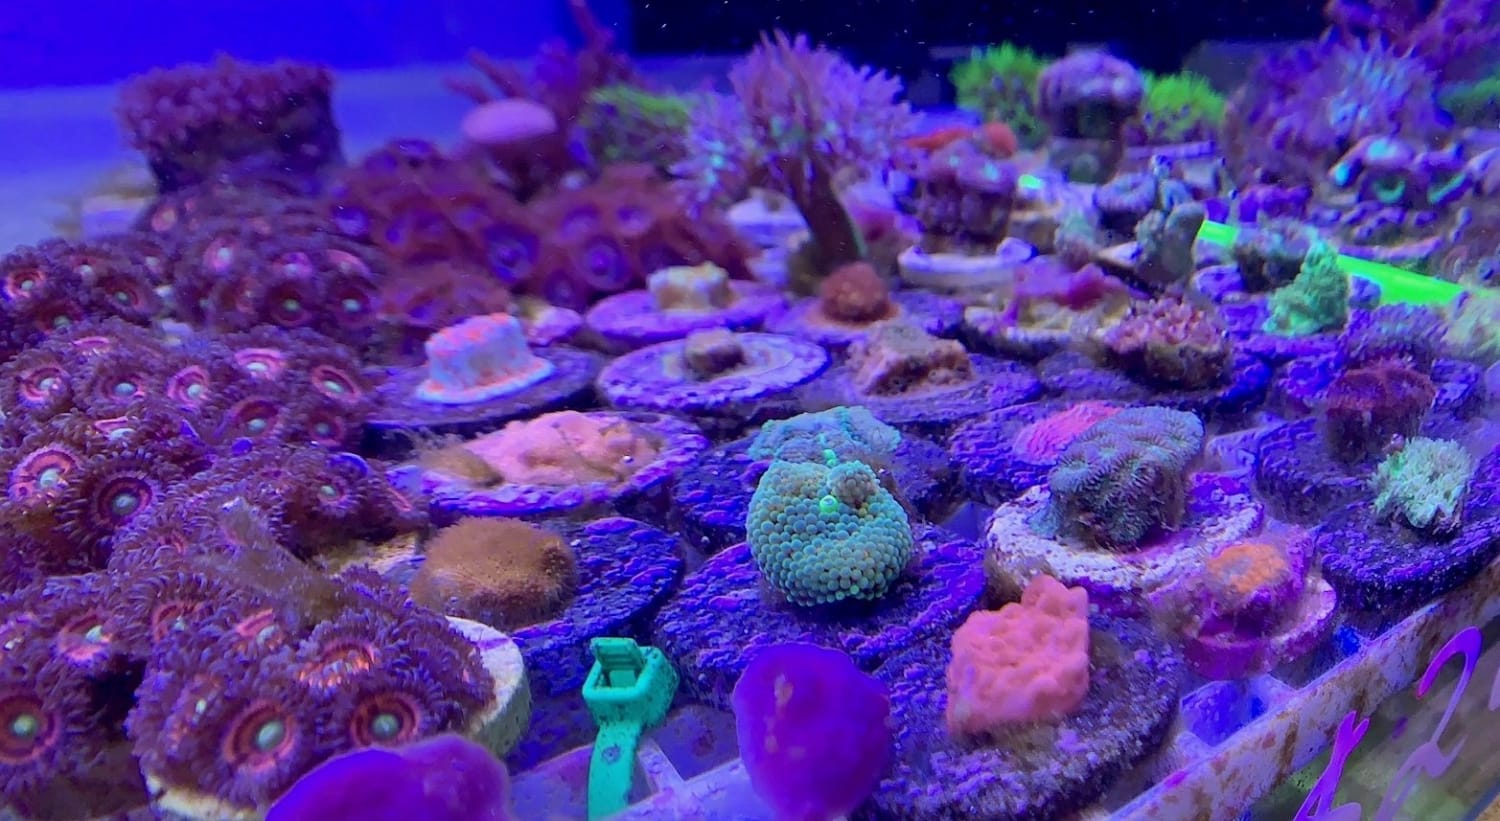 Updates to our San Jose store and a new promotion for coral frags